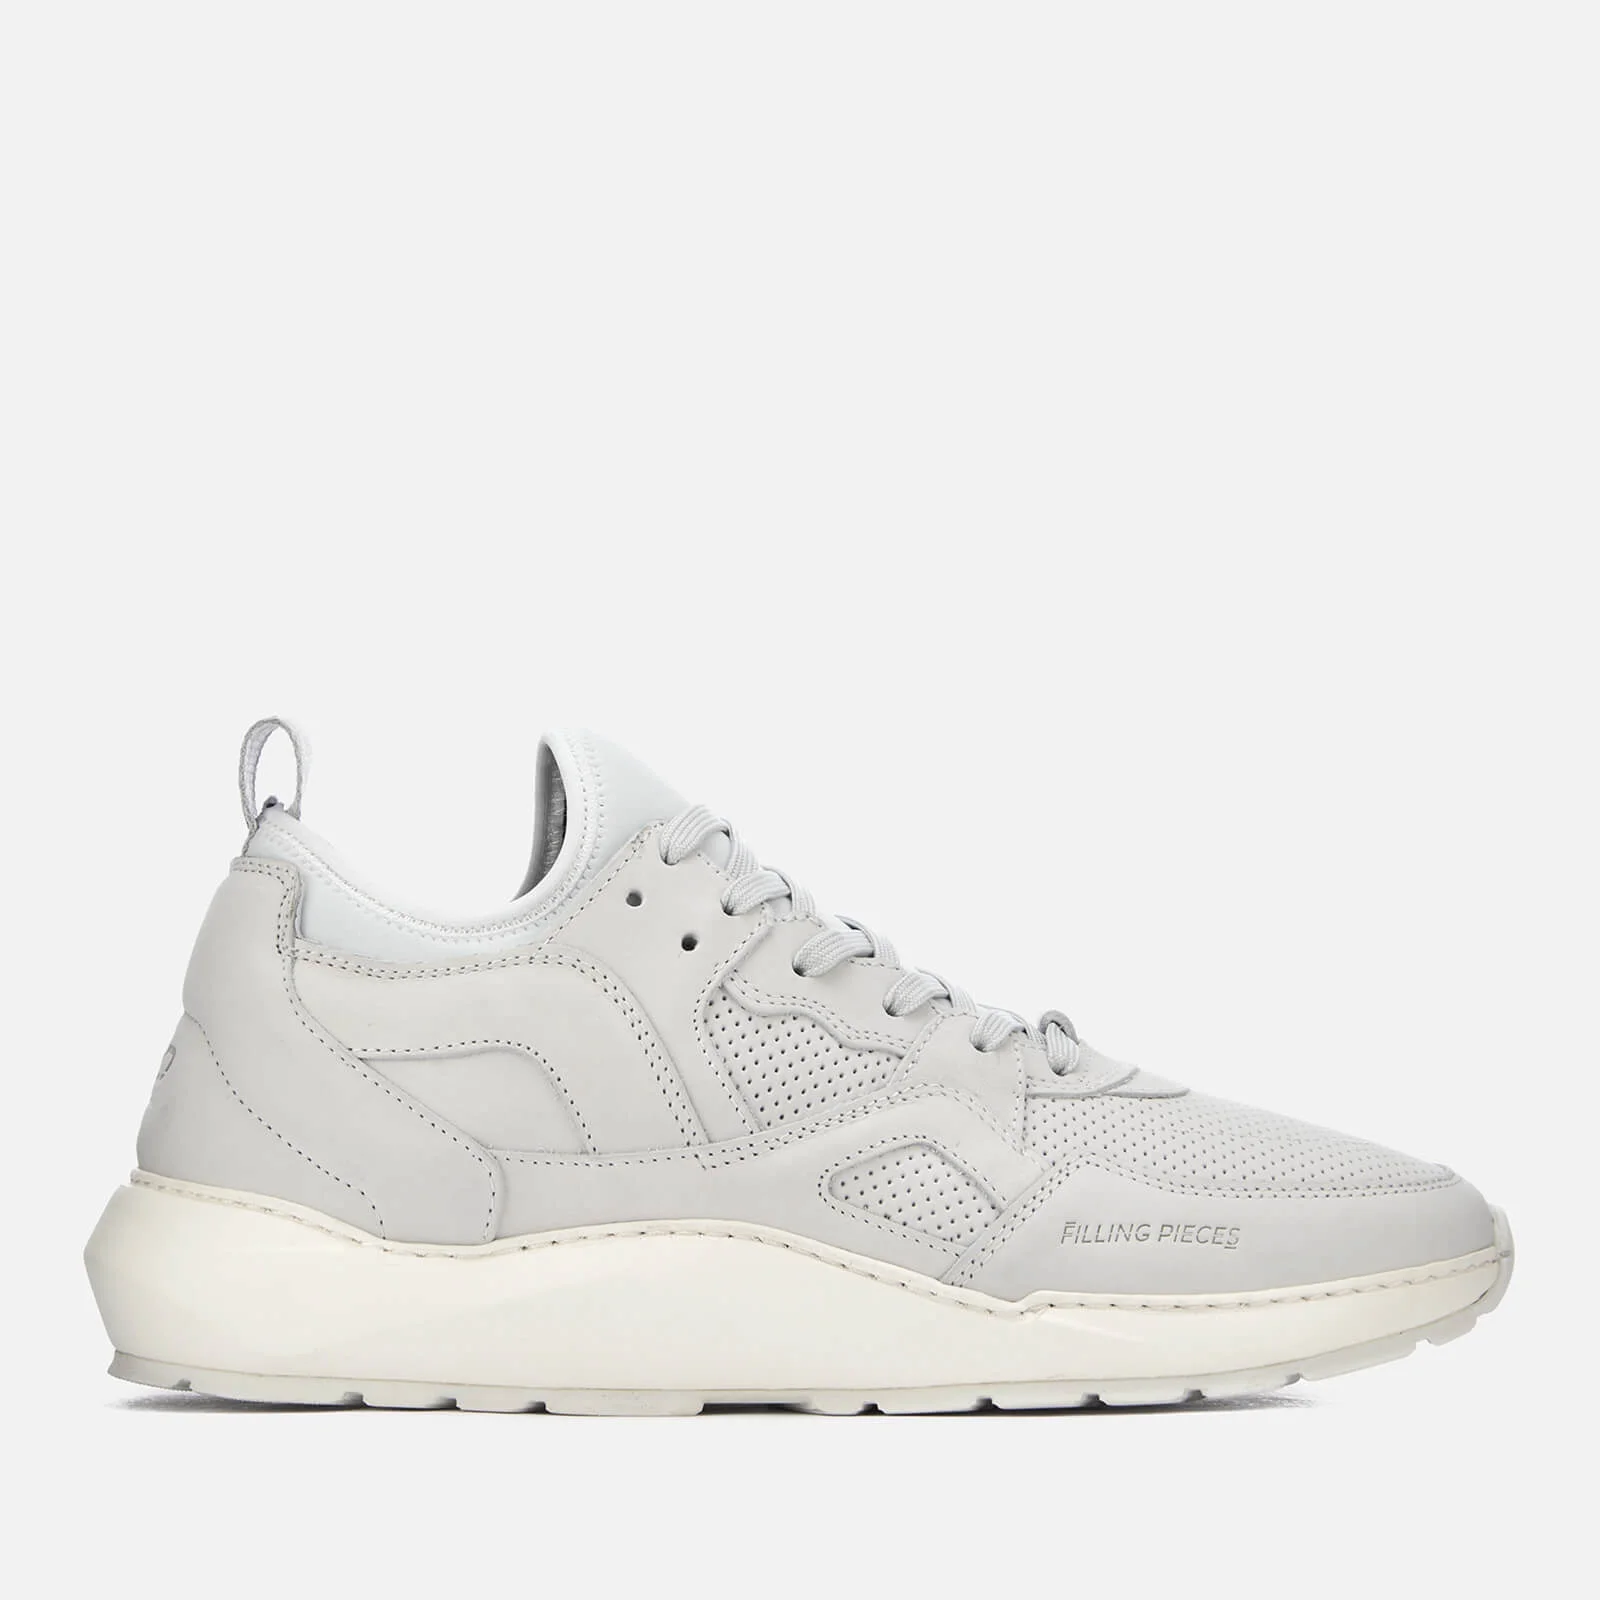 Filling Pieces Men's Origin Low Arch Runner Trainers - Wolf/White Image 1